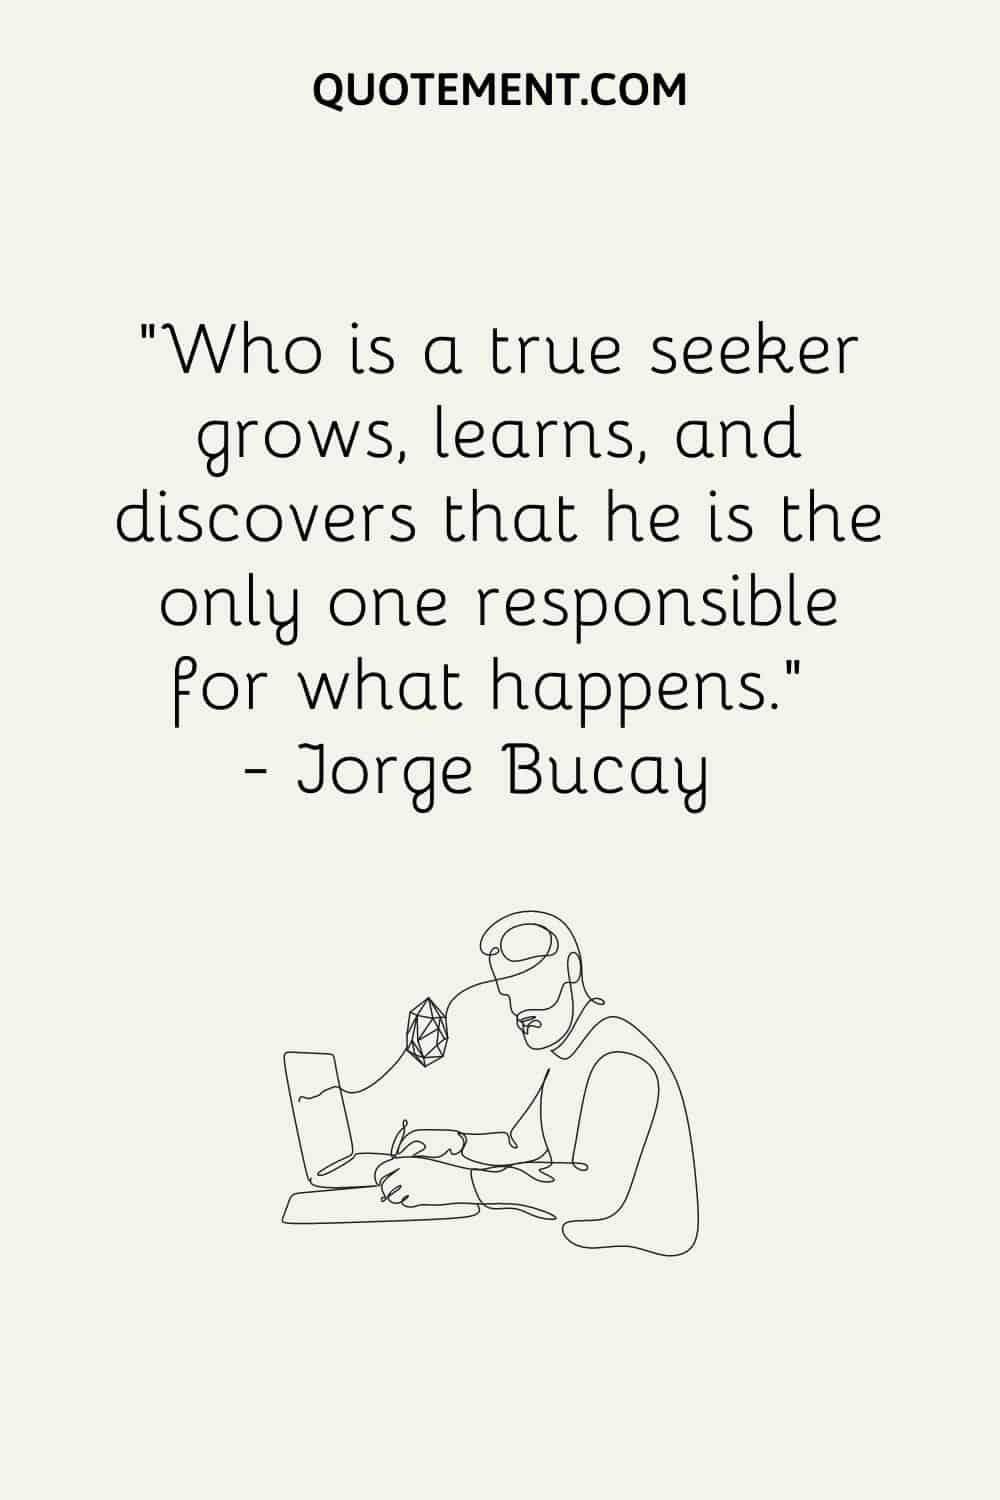 Who is a true seeker grows, learns, and discovers that he is the only one responsible for what happens